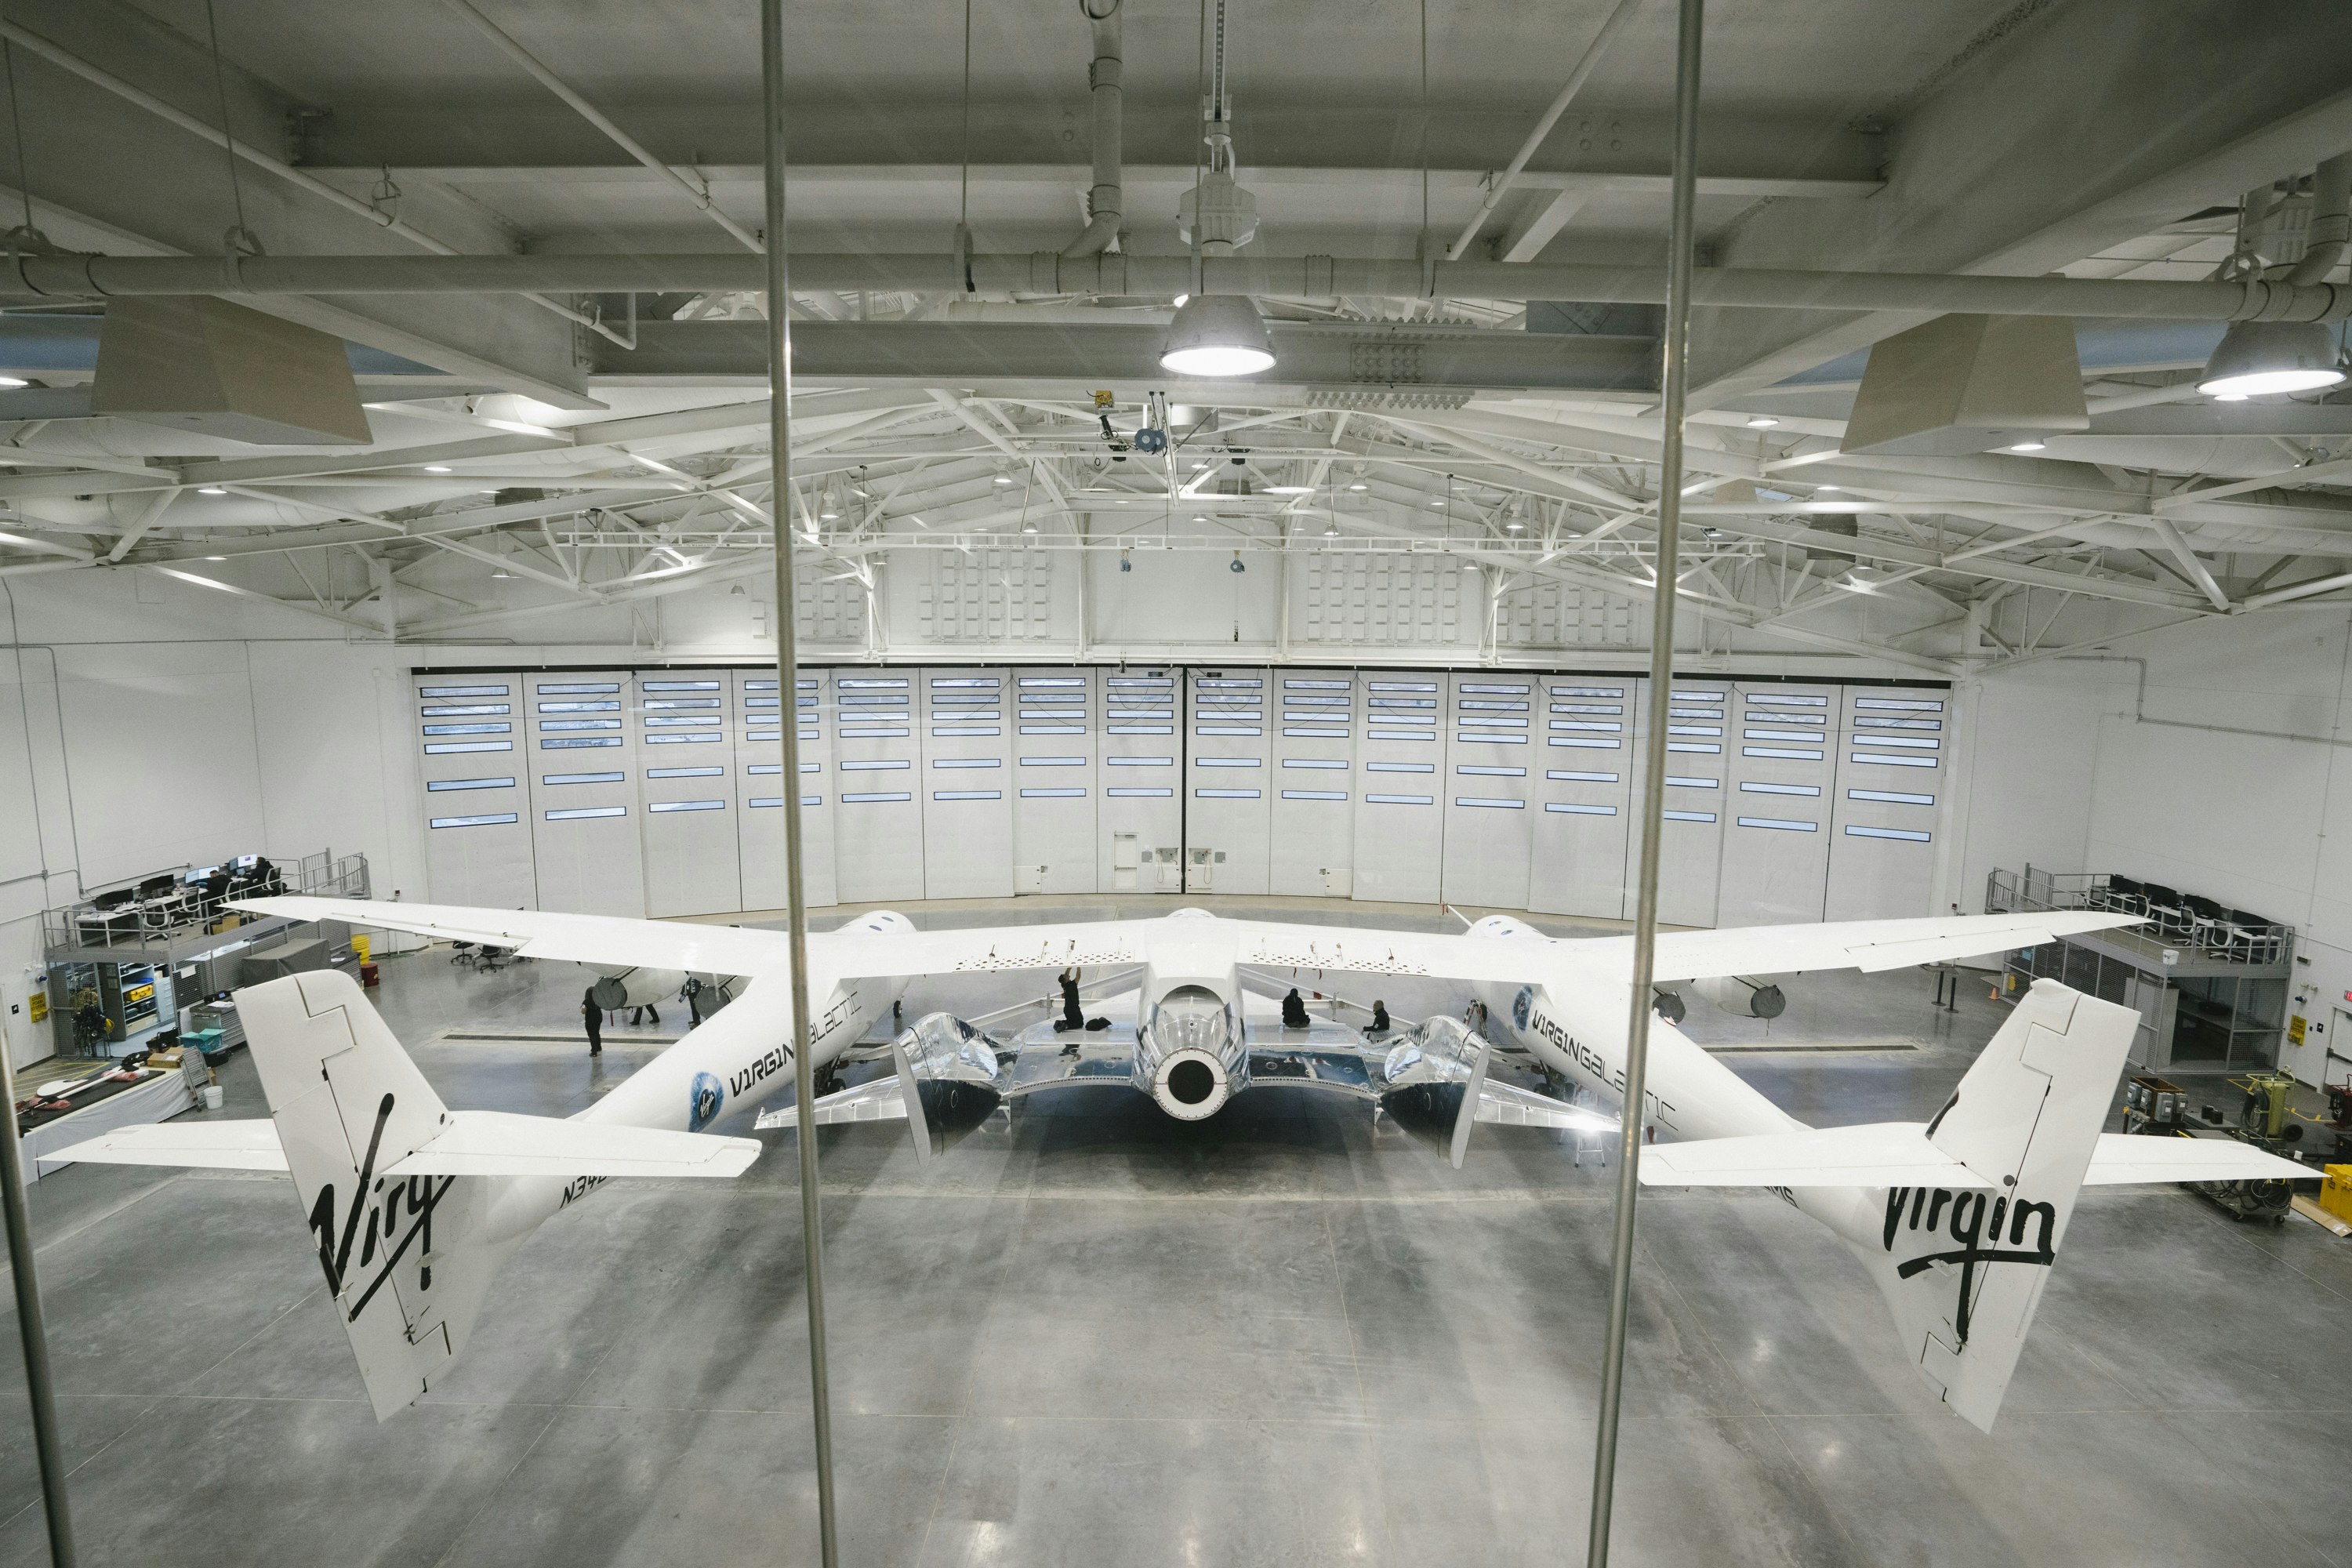 SpaceShipTwo and VMS Eve in the hangar of The Gateway to Space